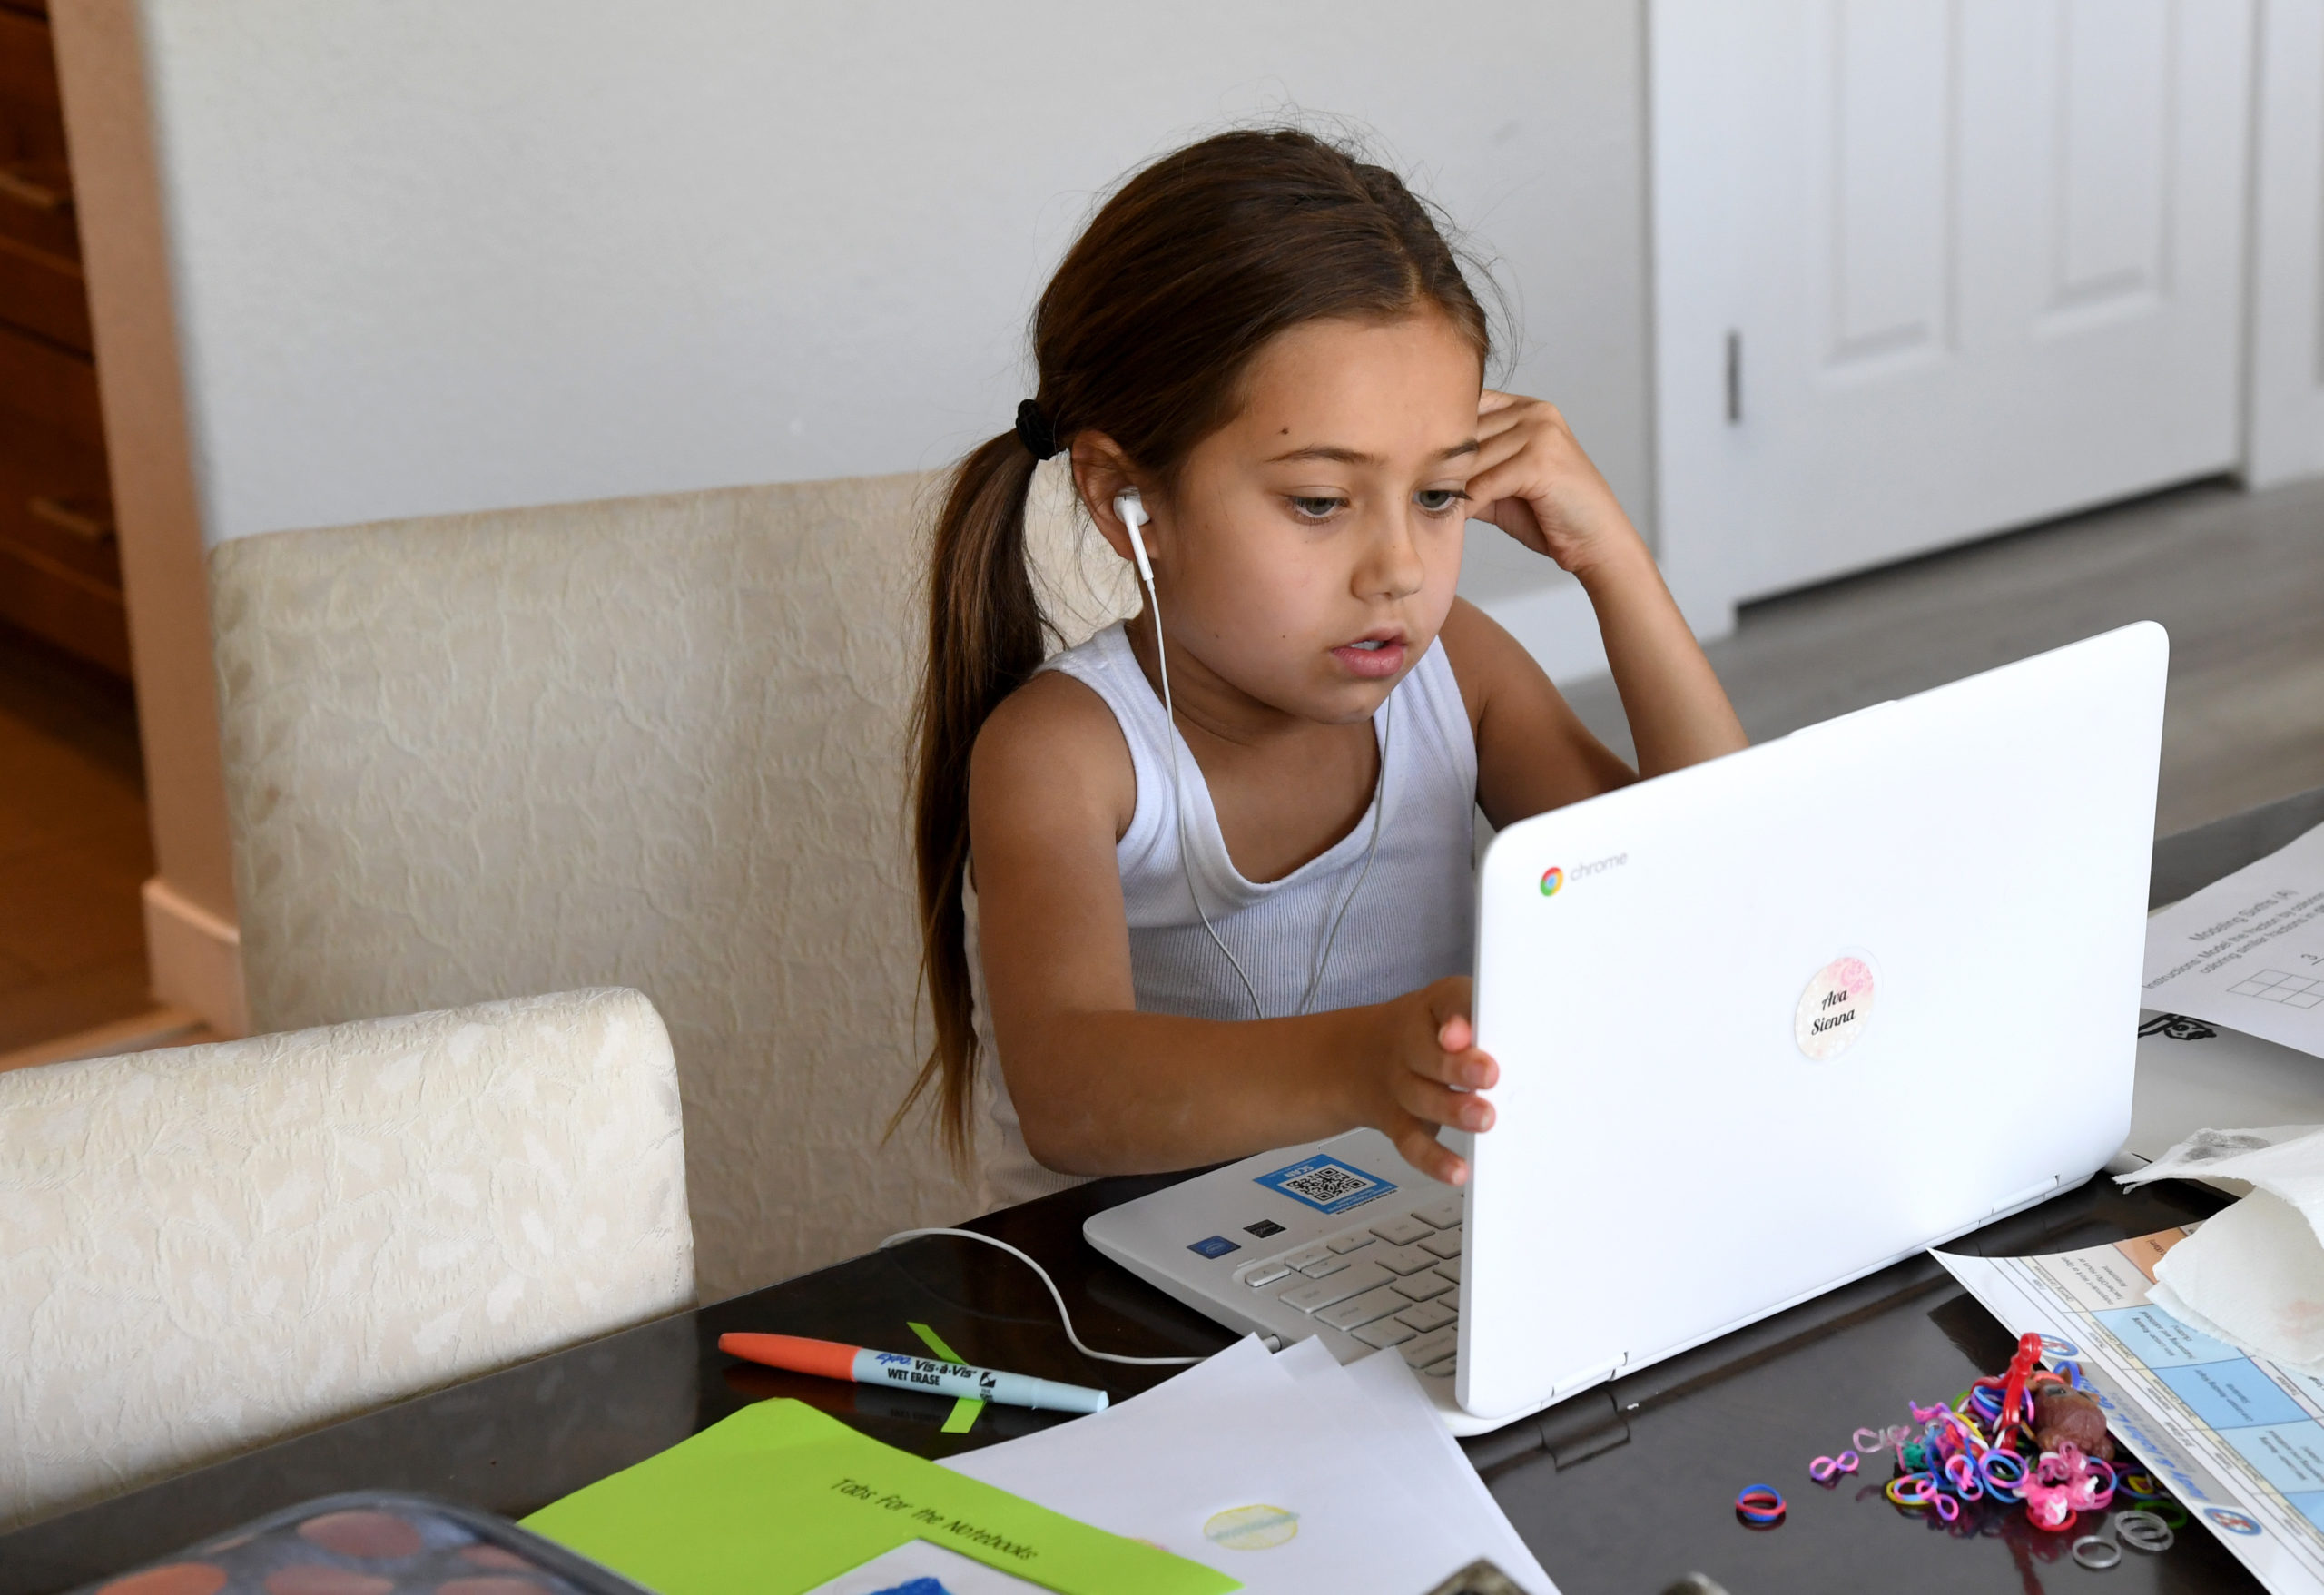 LAS VEGAS, NEVADA - AUGUST 25: Goolsby Elementary School third grader Ava Dweck, 9, takes an online class at a friend's home during the first week of distance learning for the Clark County School District amid the spread of the coronavirus (COVID-19) on August 25, 2020 in Las Vegas, Nevada. CCSD, the fifth-largest school district in the United States with more than 315,000 students, decided to start the school year with a full-time distance education instructional model as part of its Reopening Our Schools Plan due to health and safety concerns over the pandemic. (Photo by Ethan Miller/Getty Images)